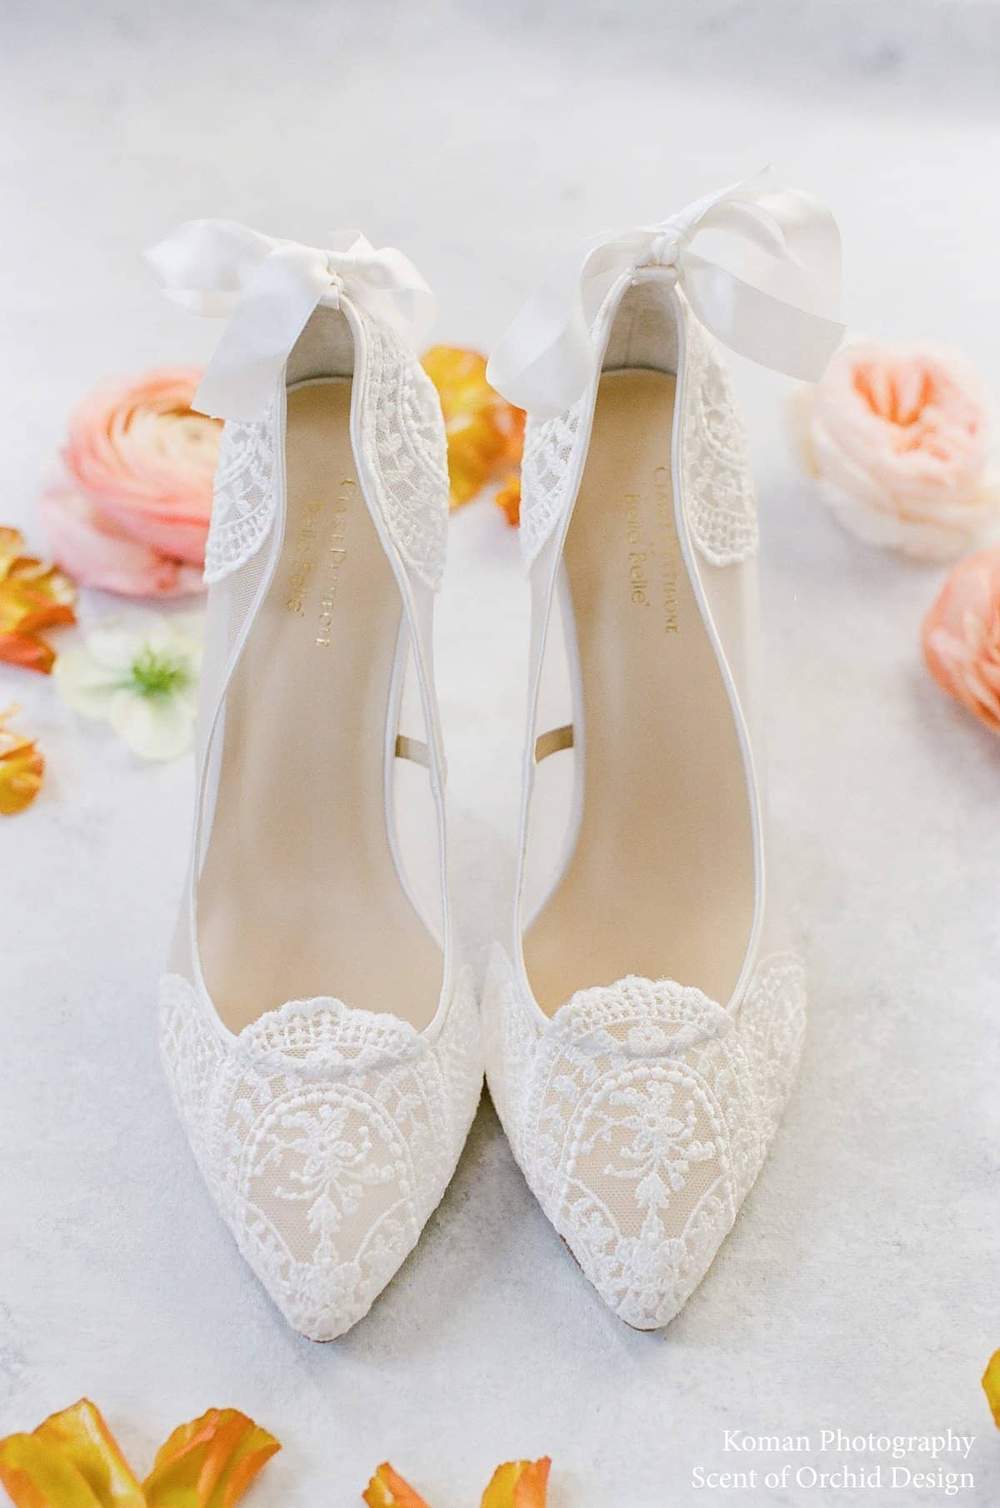 THESE ARE THE TOP 2022 WEDDING SHOE TRENDS - The Aisle Wedding Directory